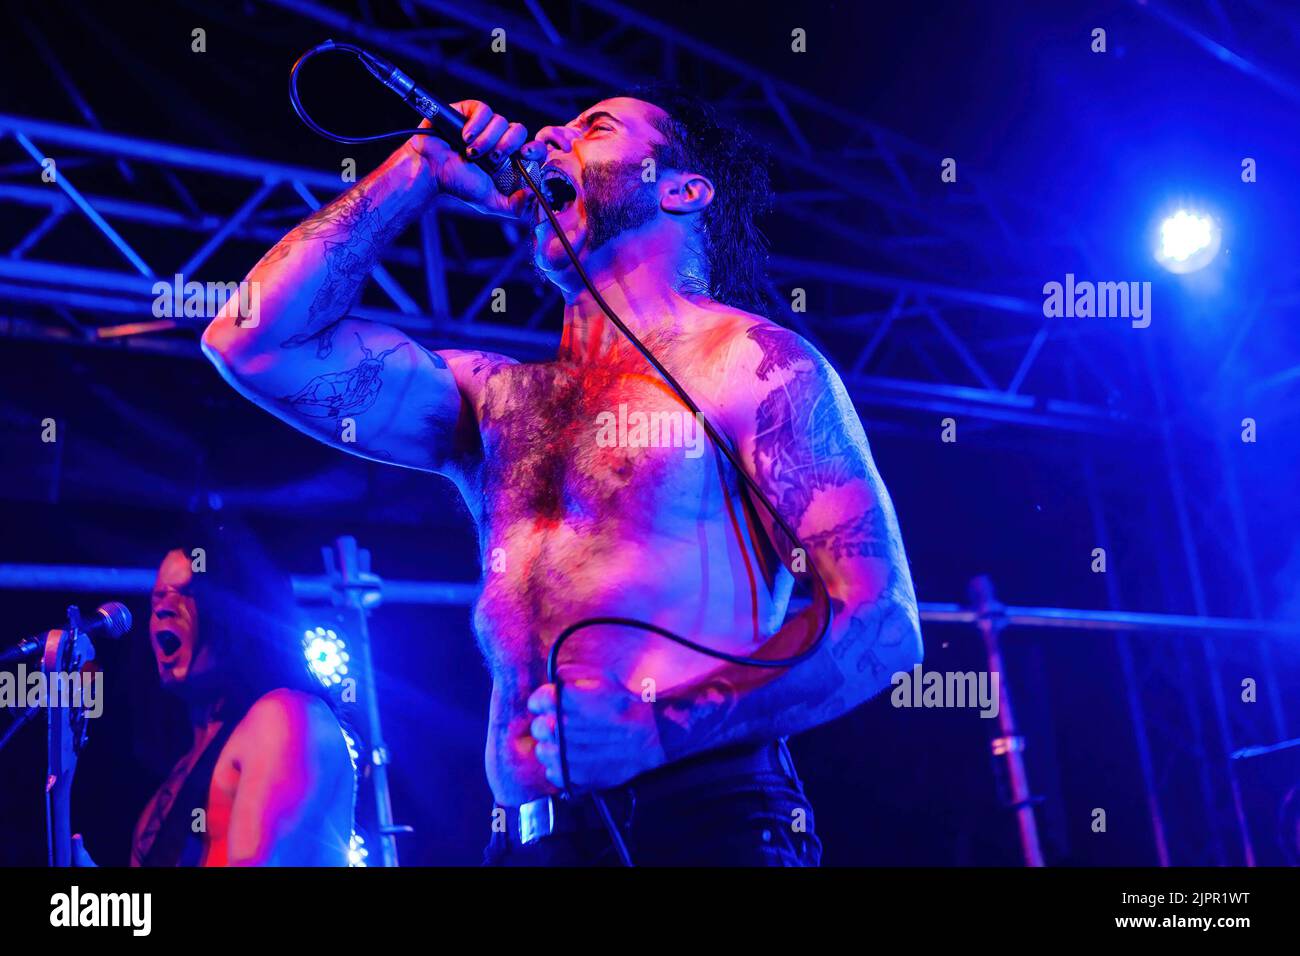 Milano, Italy. 19th Aug, 2022. Alex Story singer of Doyle from Misfits performs live during a concert at Circolo Magnolia. Doyle Wolfgang von Frankenstein, is an American guitarist best known for his material with the horror punk band the Misfits and his own band eponymously named Doyle. (Photo by Mairo Cinquetti/SOPA Images/Sipa USA) Credit: Sipa USA/Alamy Live News Stock Photo